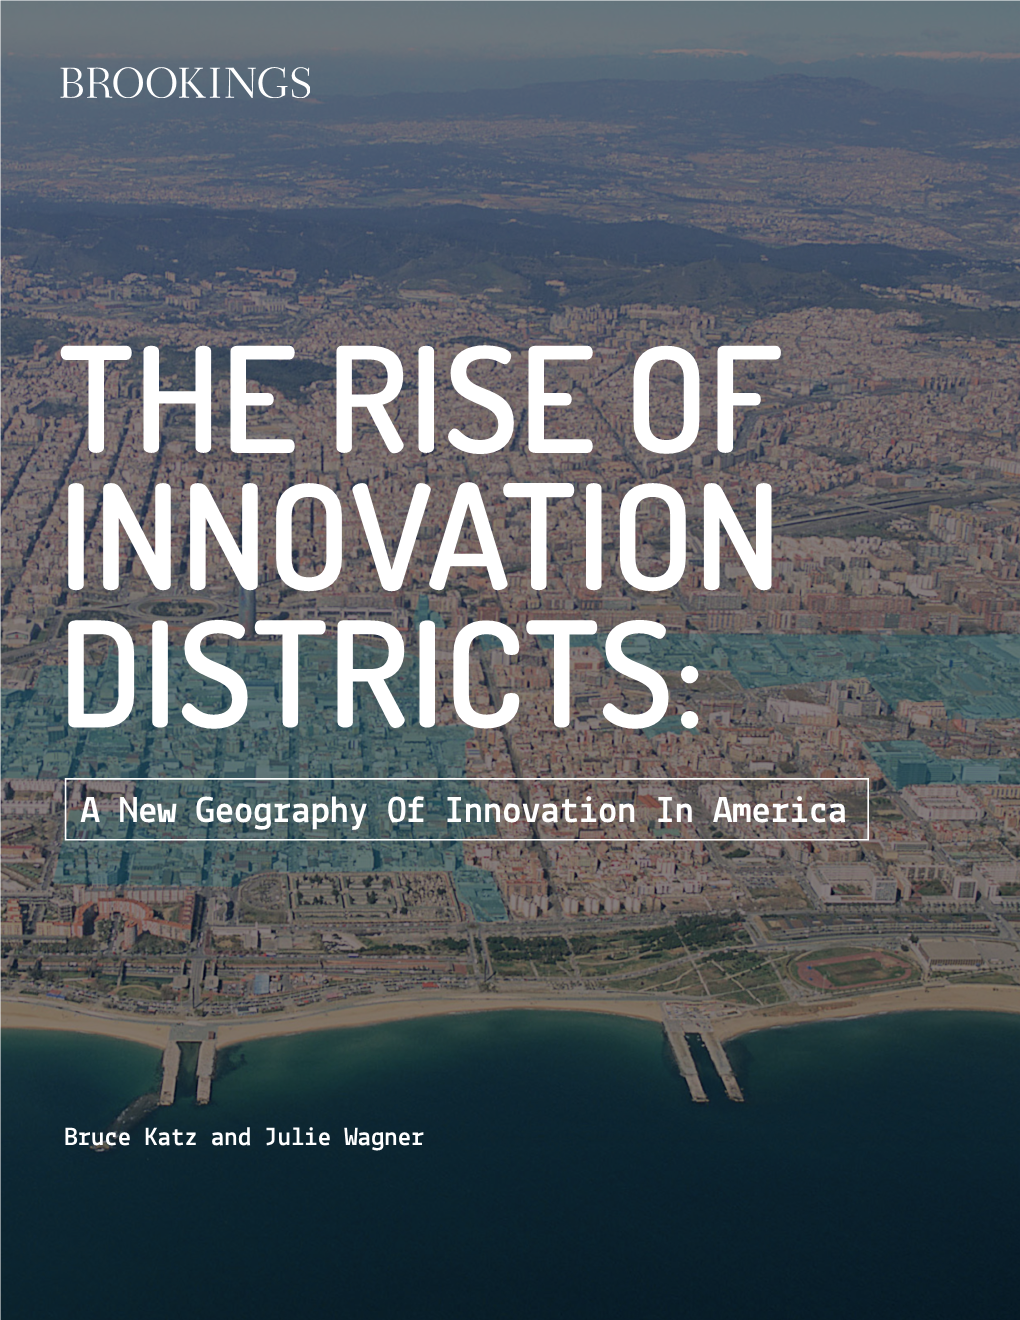 Innovation Districts